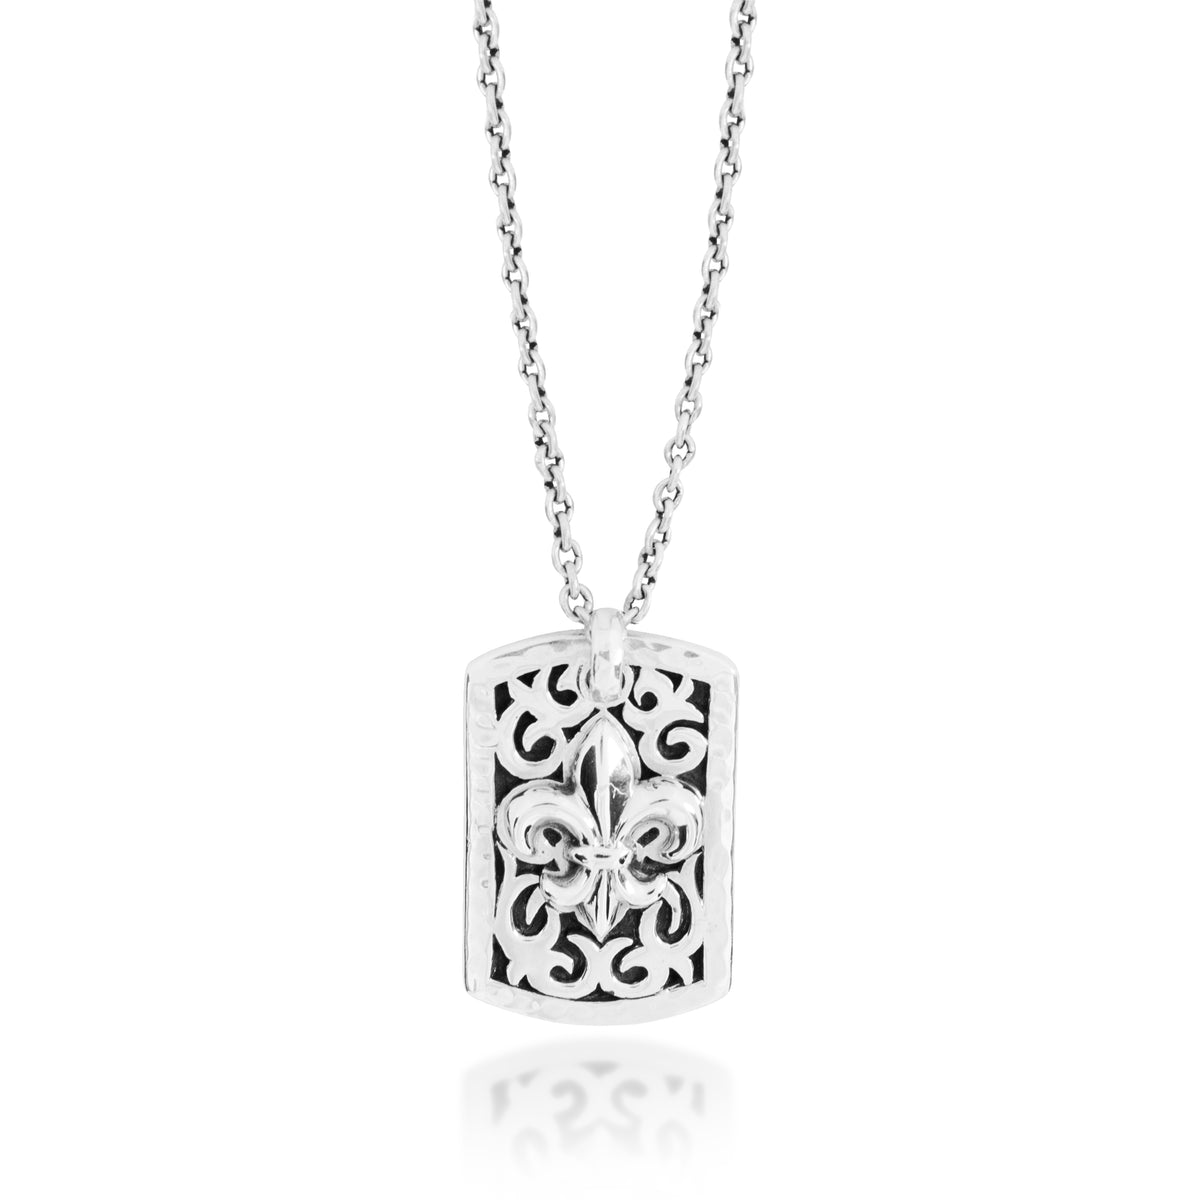 Small Classic LH Tribal Scroll ID Tag with Fleur-De-Lis Middle Pendant Necklace. 29mm x 19mm Pendant